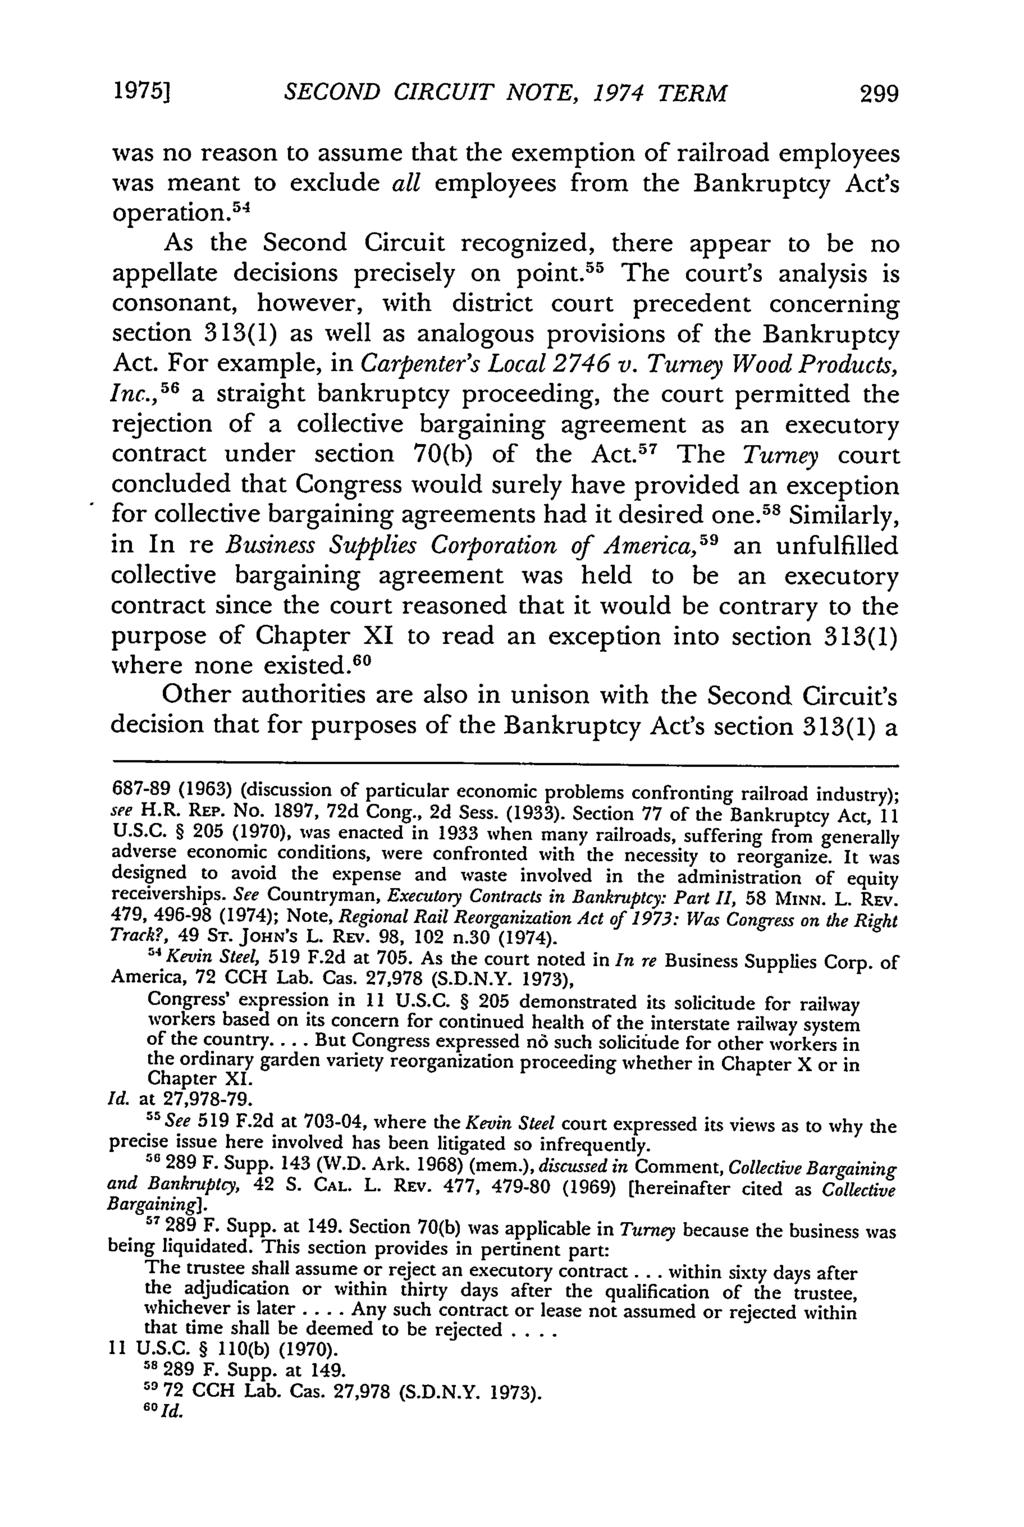 1975] SECOND CIRCUIT NOTE, 1974 TERM was no reason to assume that the exemption of railroad employees was meant to exclude all employees from the Bankruptcy Act's operation.